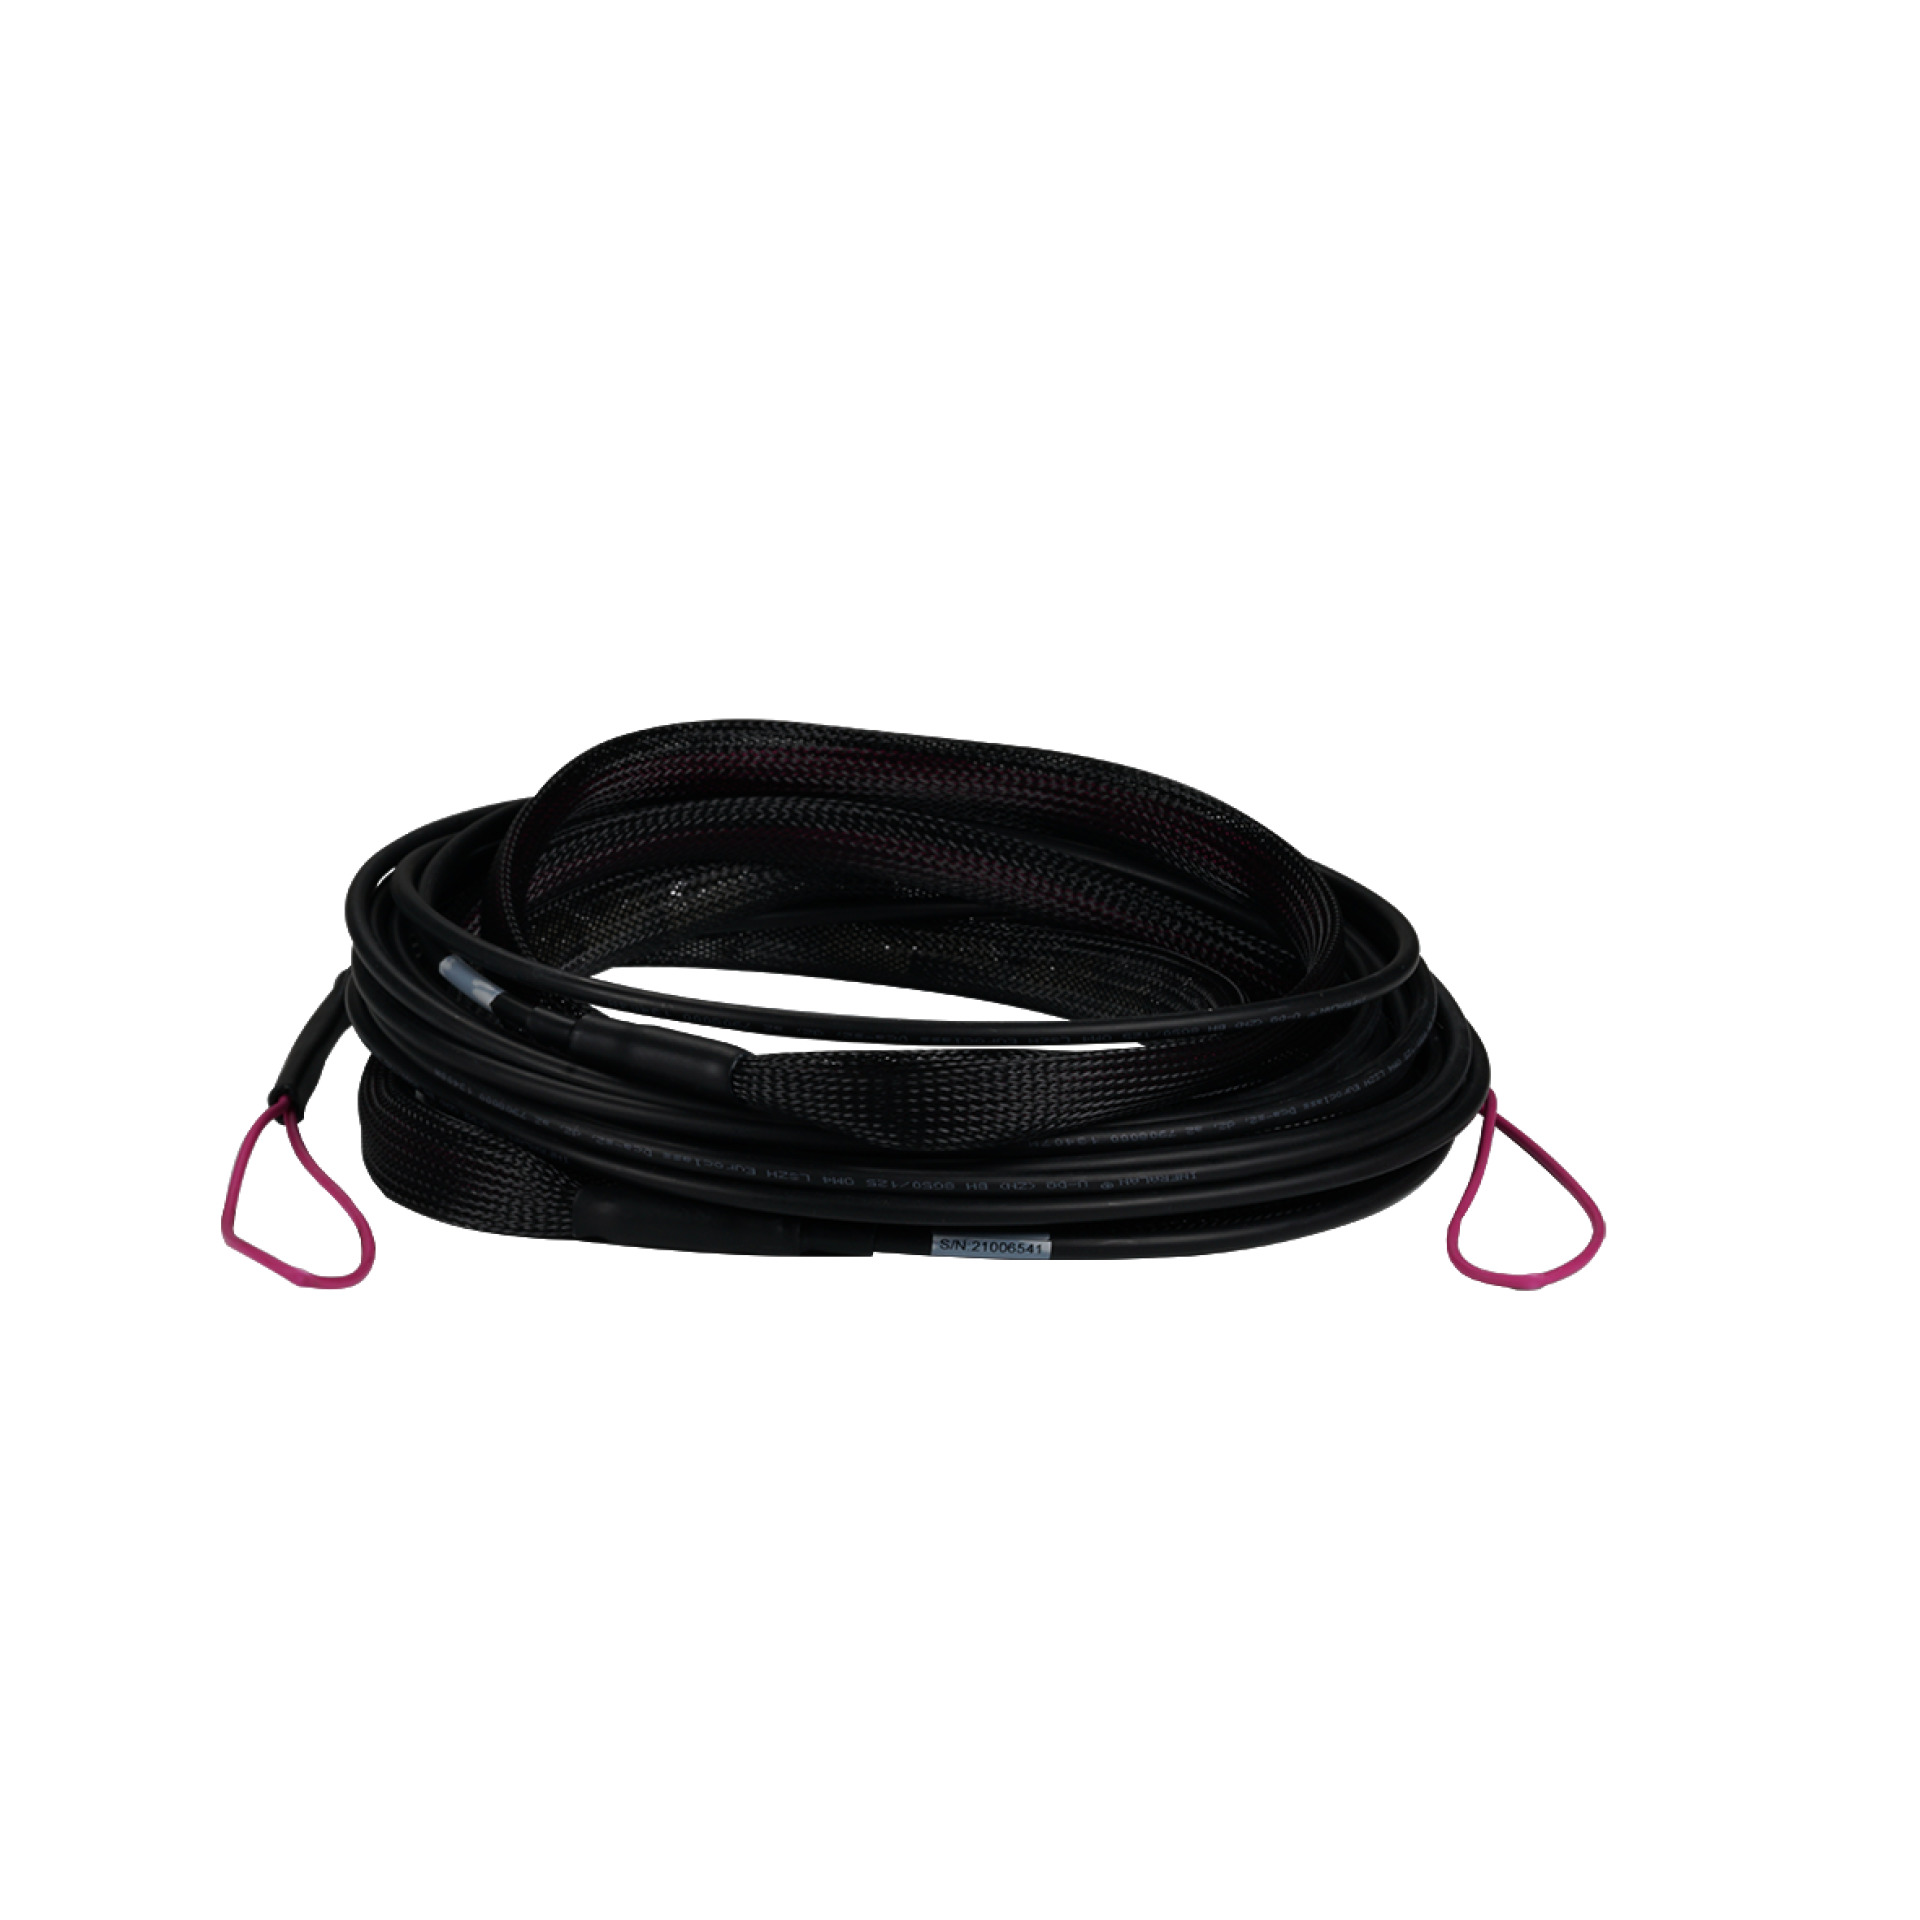 Trunk cable U-DQ(ZN)BH 4G 50/125, SC/SC OM4 30m